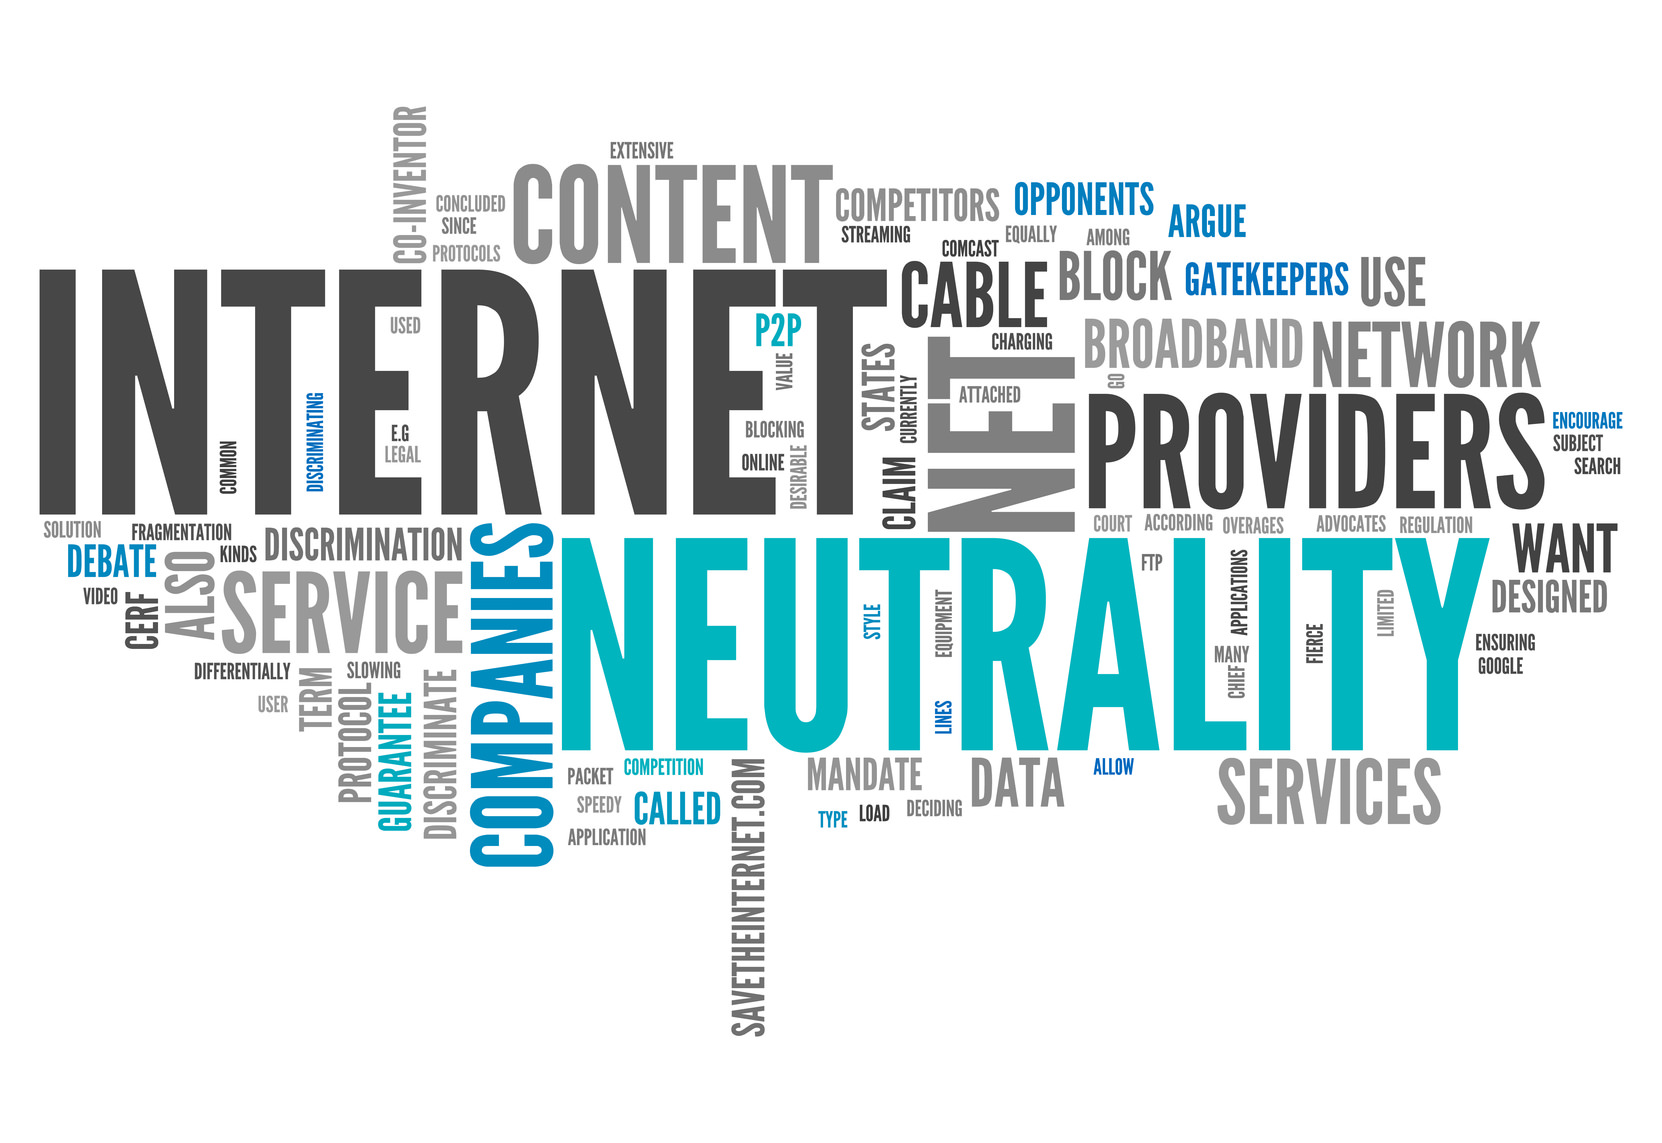 Network Neutrality: Wireless should Be Looked at Through a Different Lens